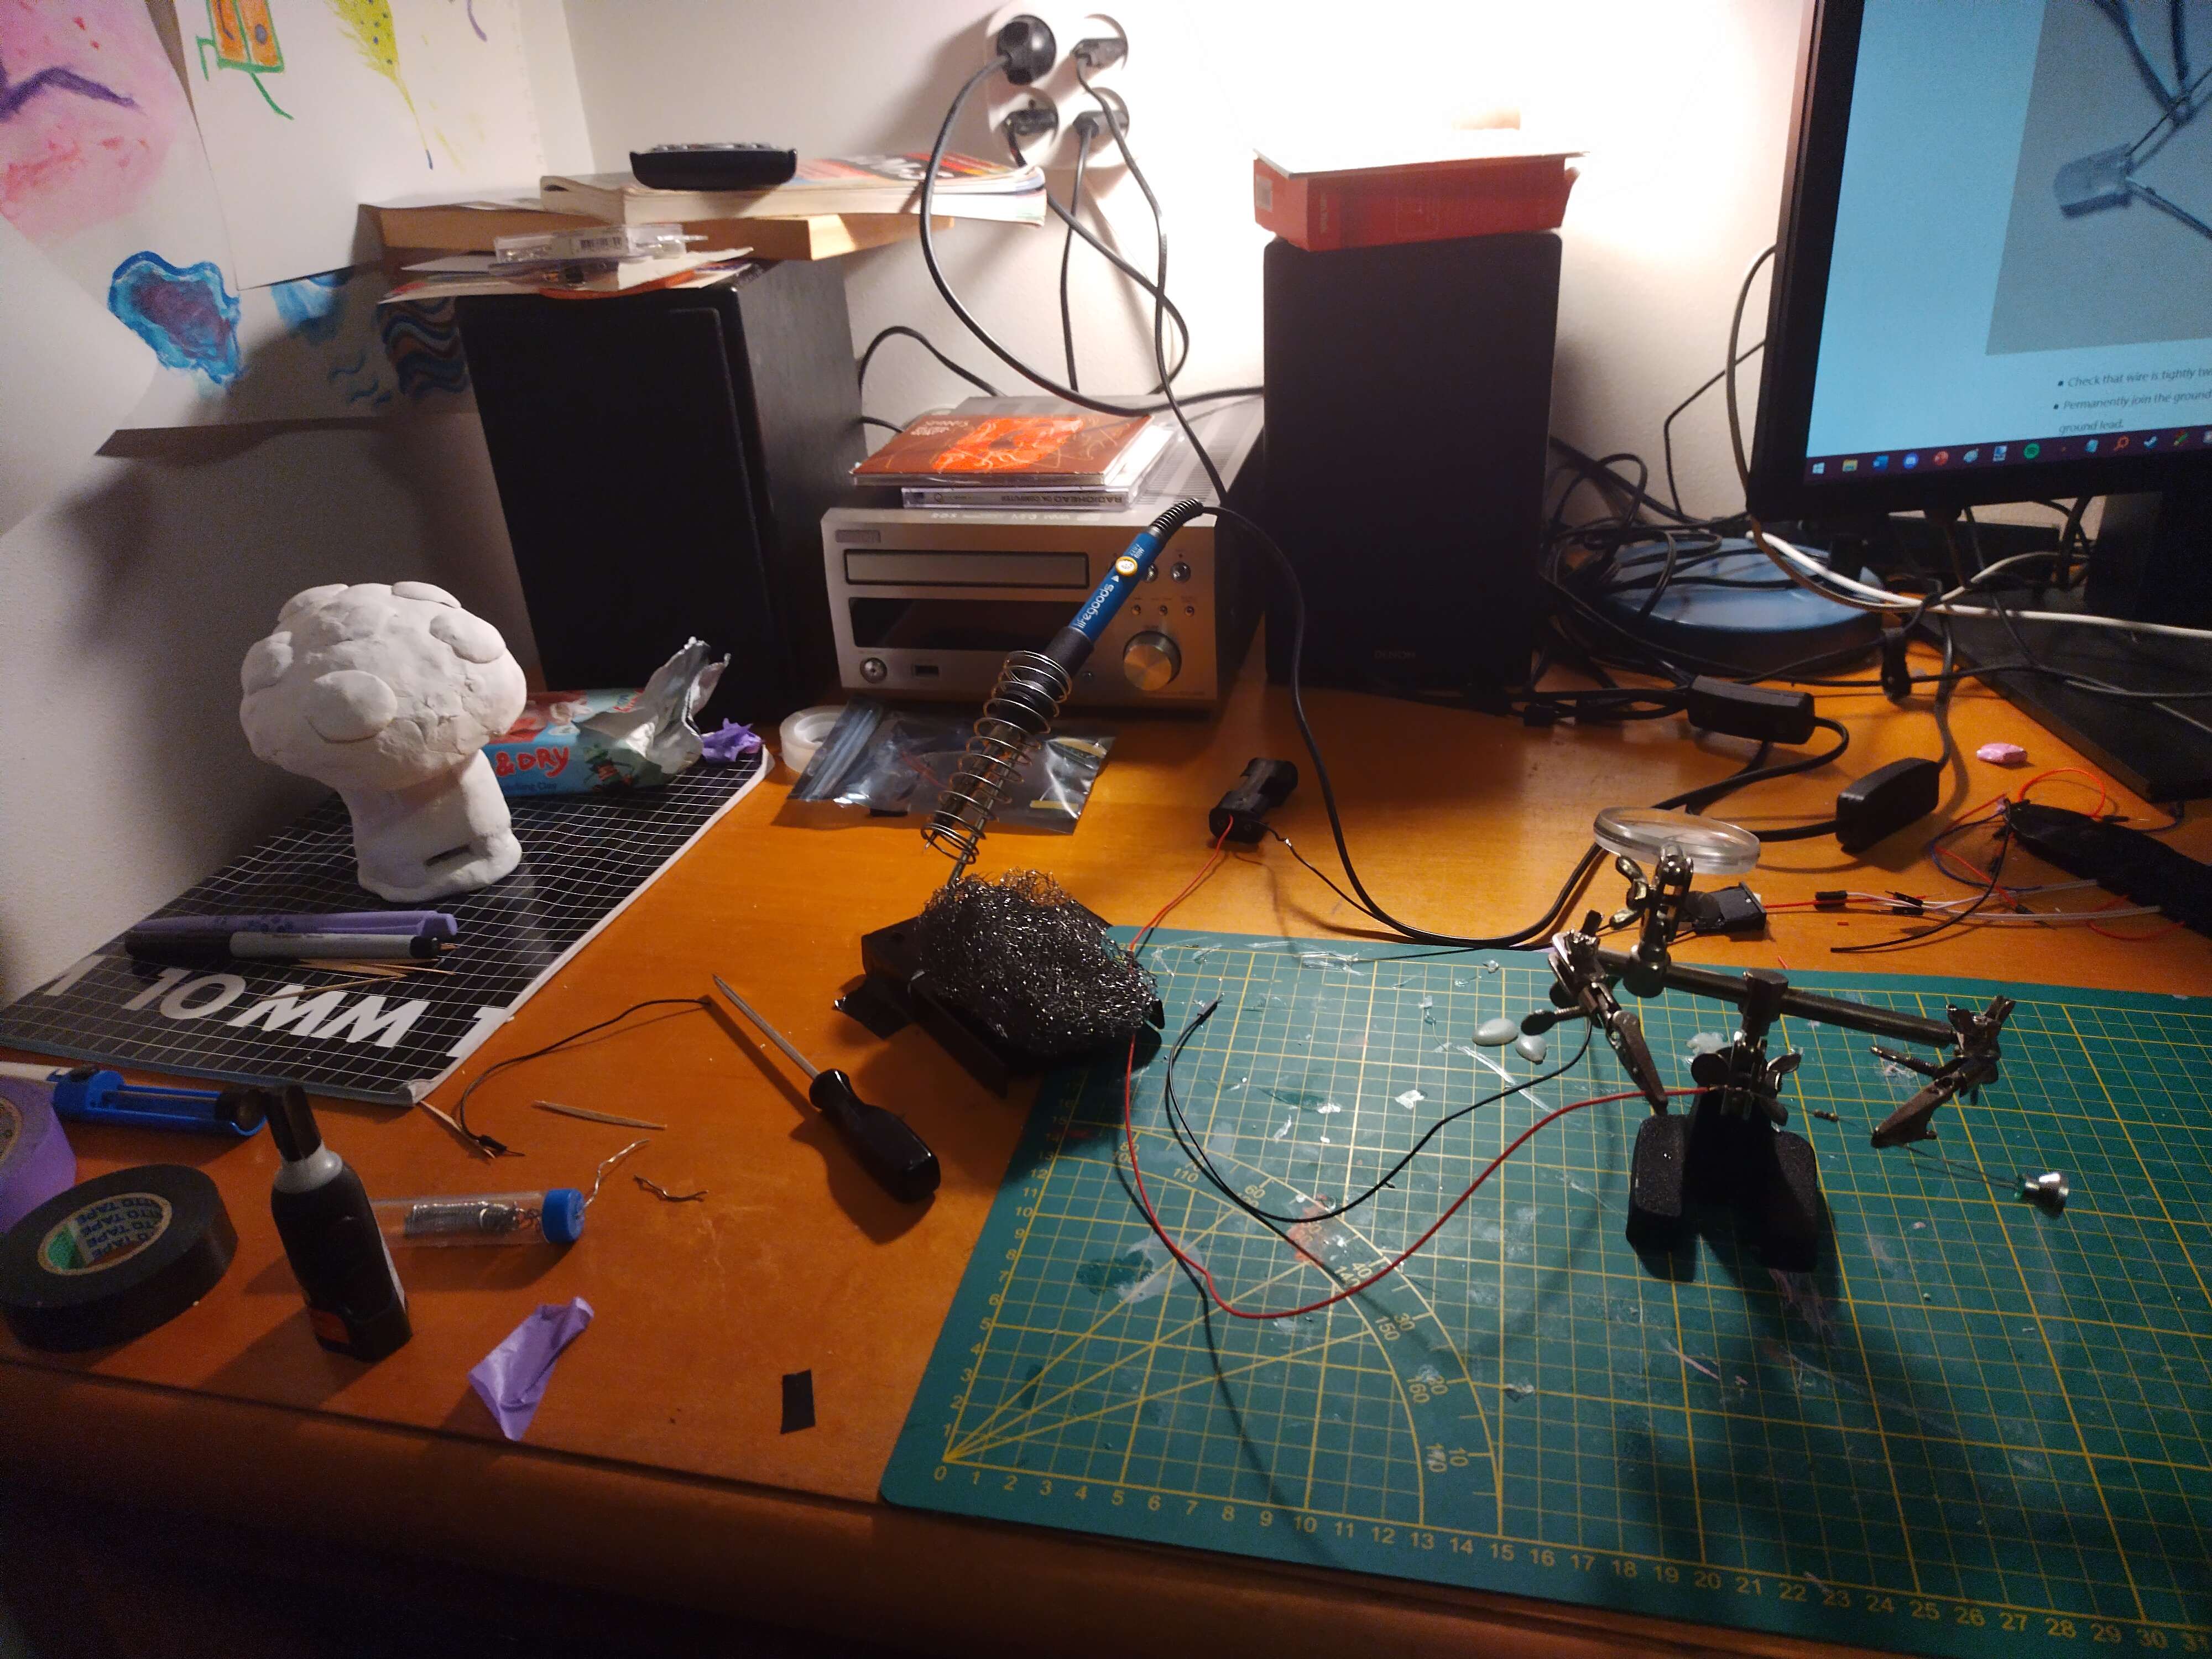 A picture of my desk with lots of soldering and sculpting stuff on it.